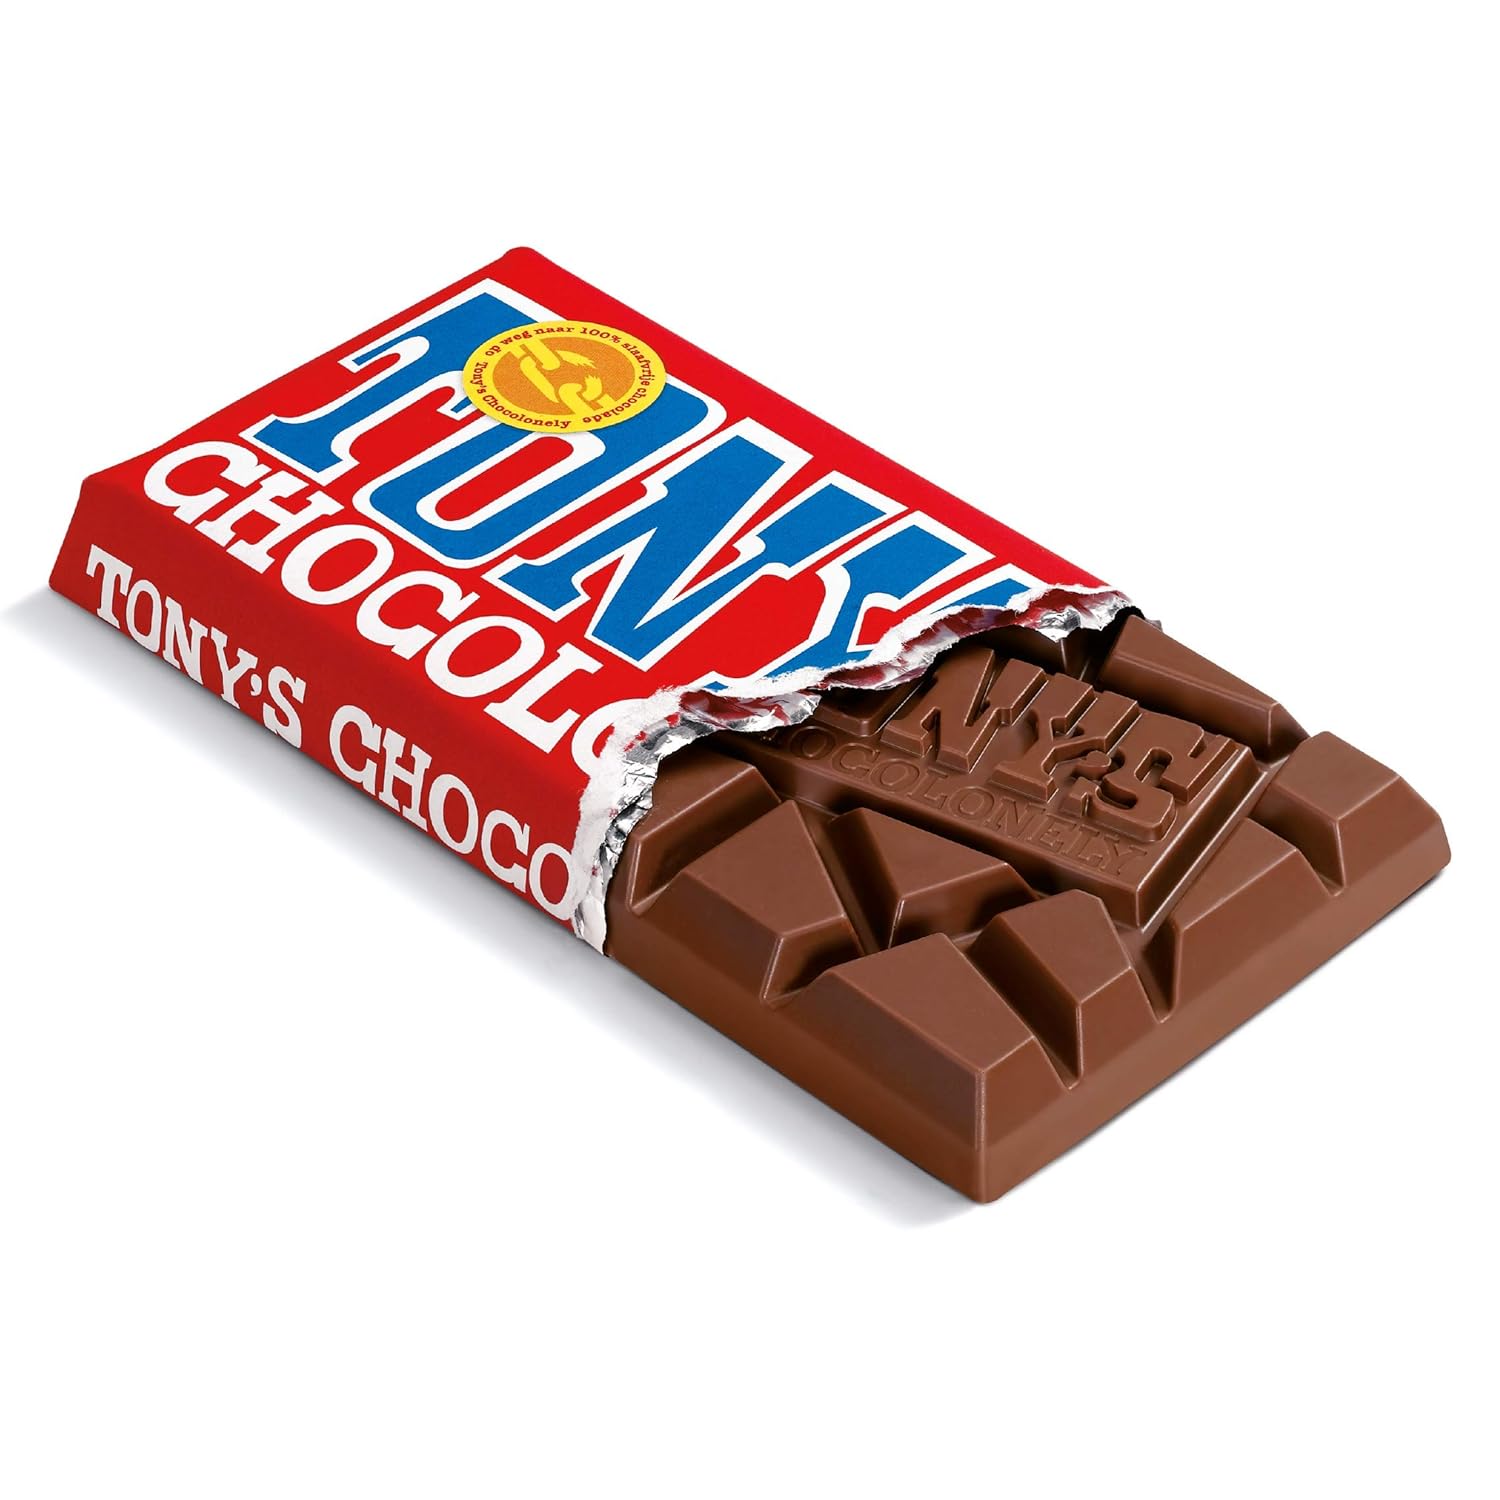  Tonys Chocolonely 32% Milk Chocolate Bars, 6.35 Ounce, 15 Pack